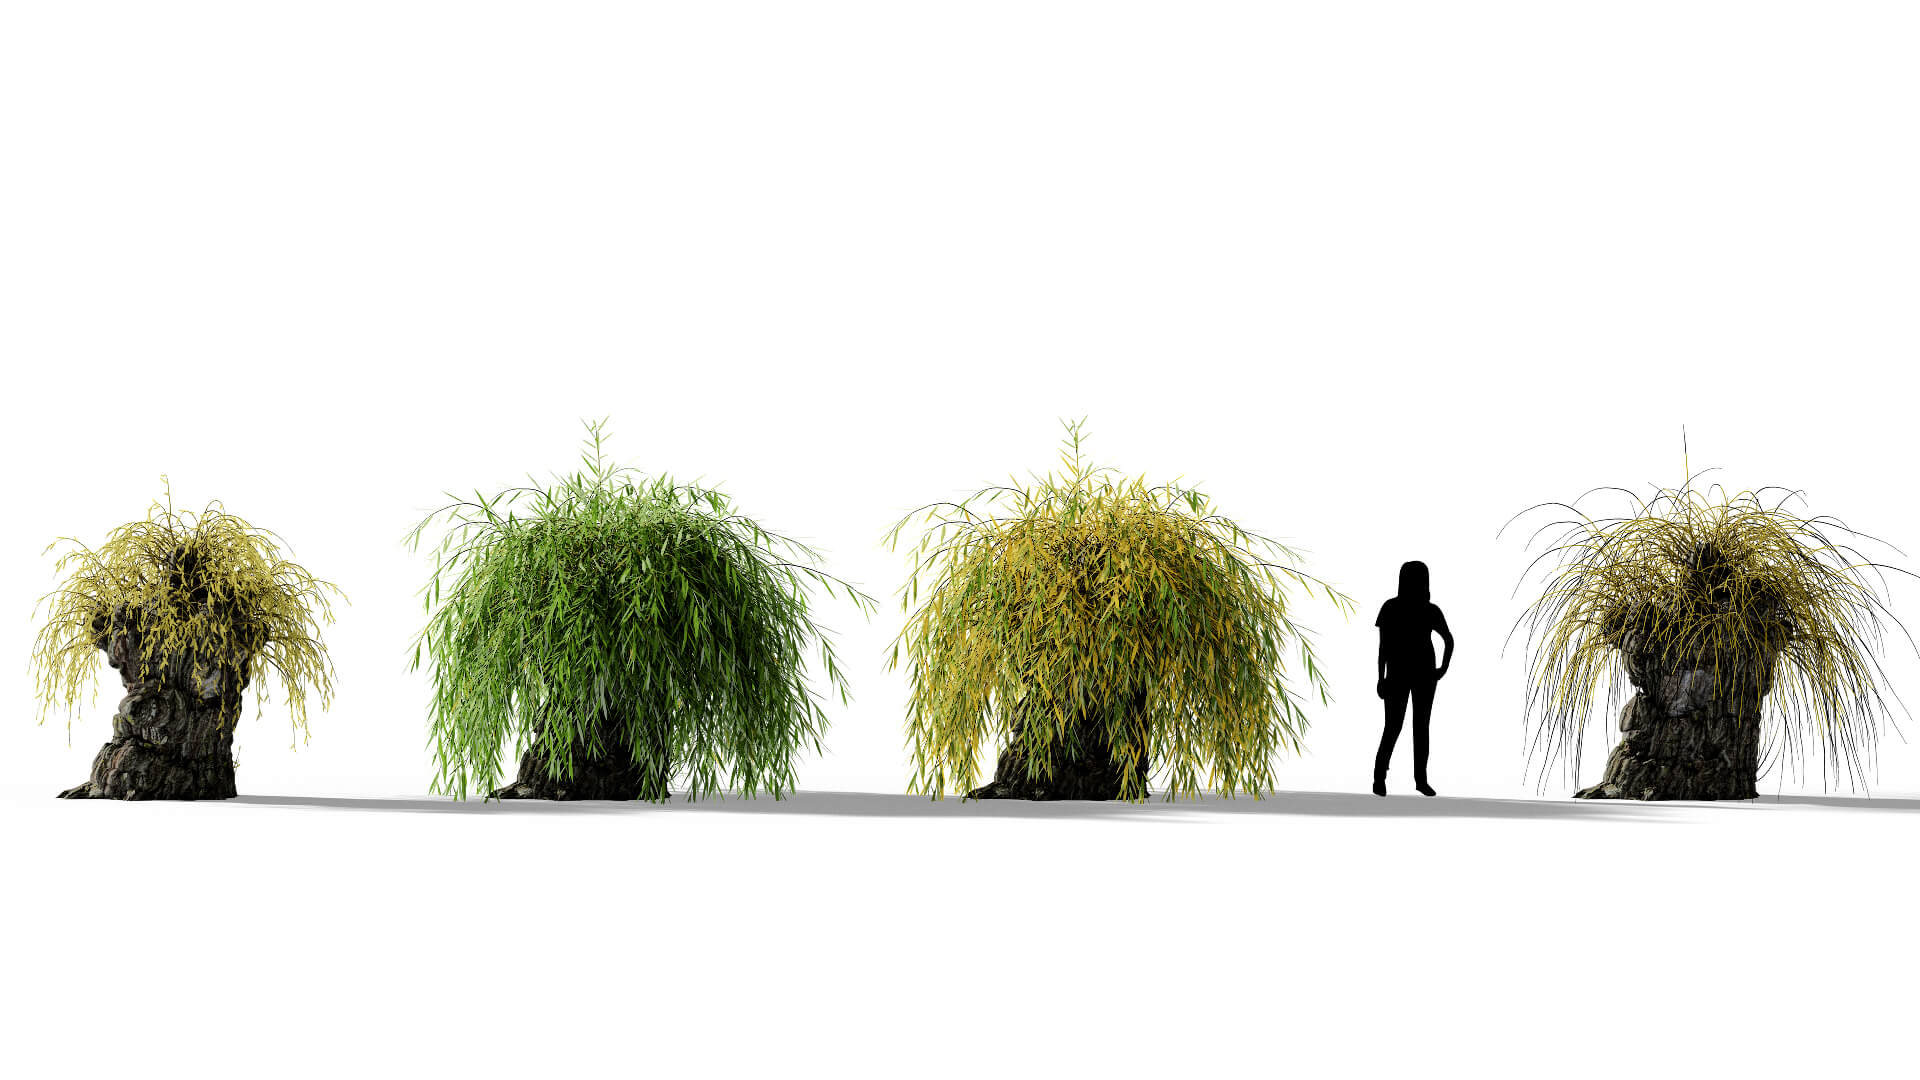 3D model of the Weeping willow pollarded Salix babylonica pollarded season variations